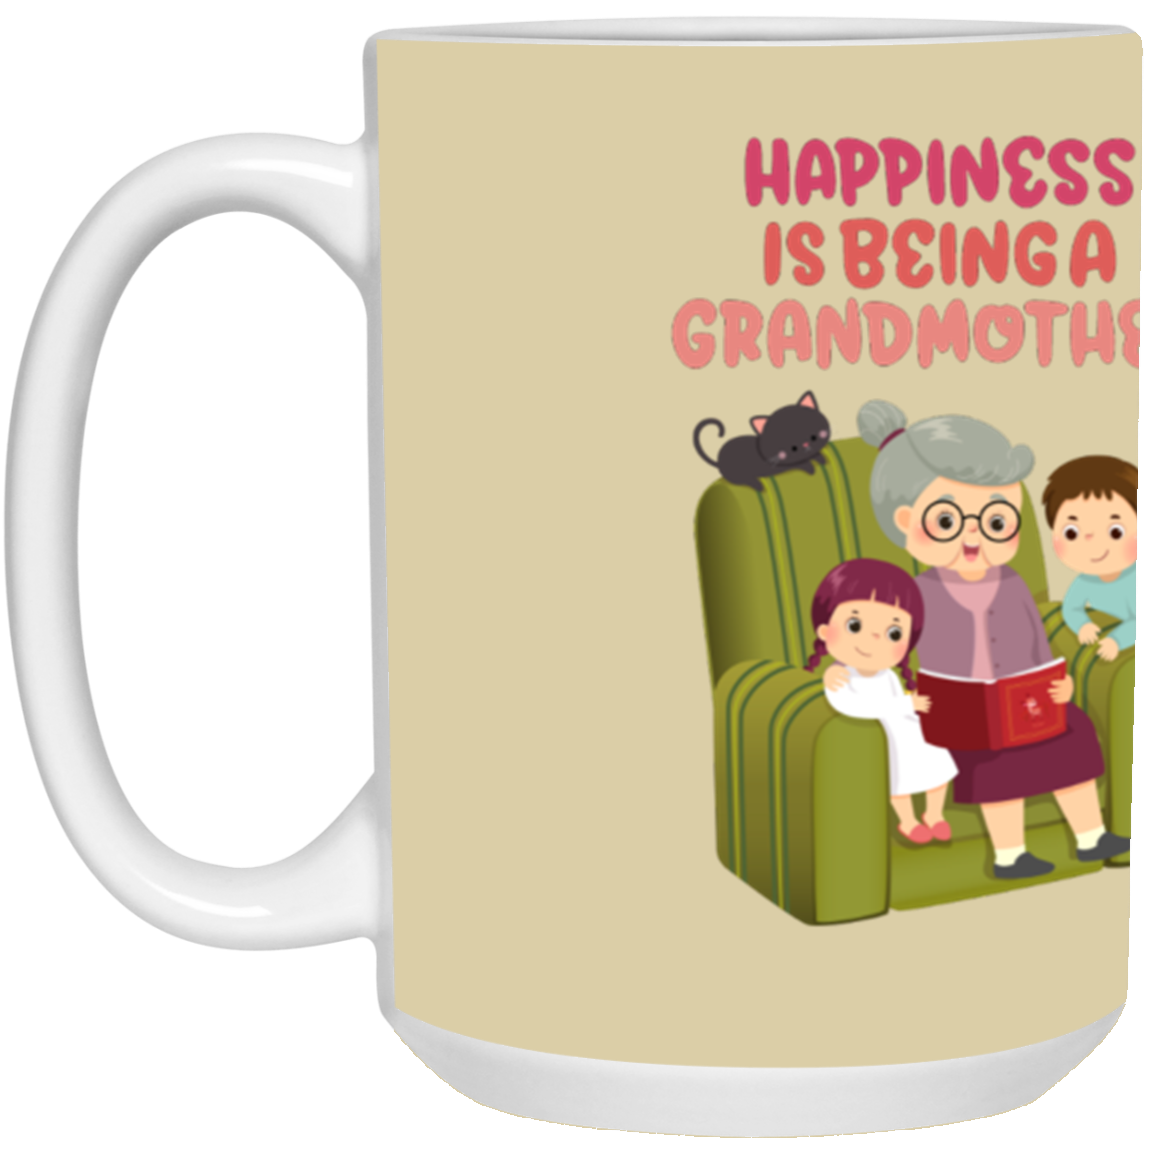 TO MY HAPPINESS IS BEING A GRANDMOTHER-MUGS 15 oz. White Mug